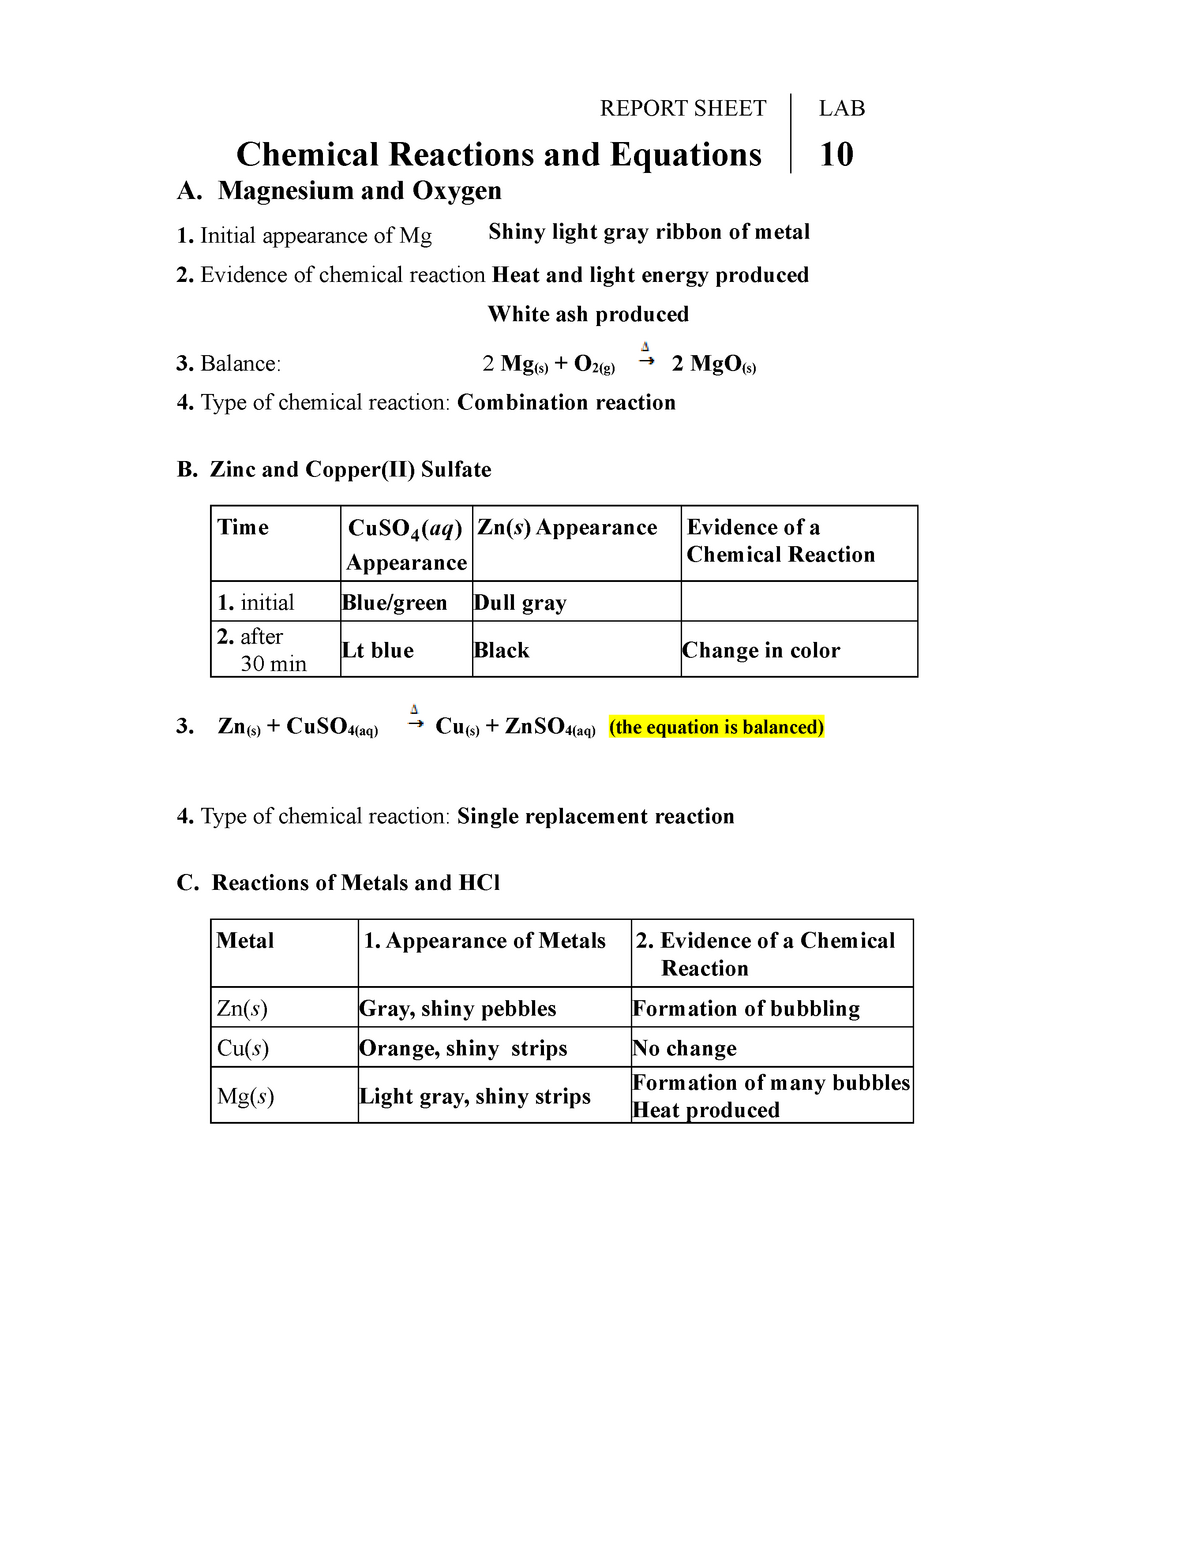 lab10-chemical-reactions-and-equations-a-magnesium-and-oxygen-1